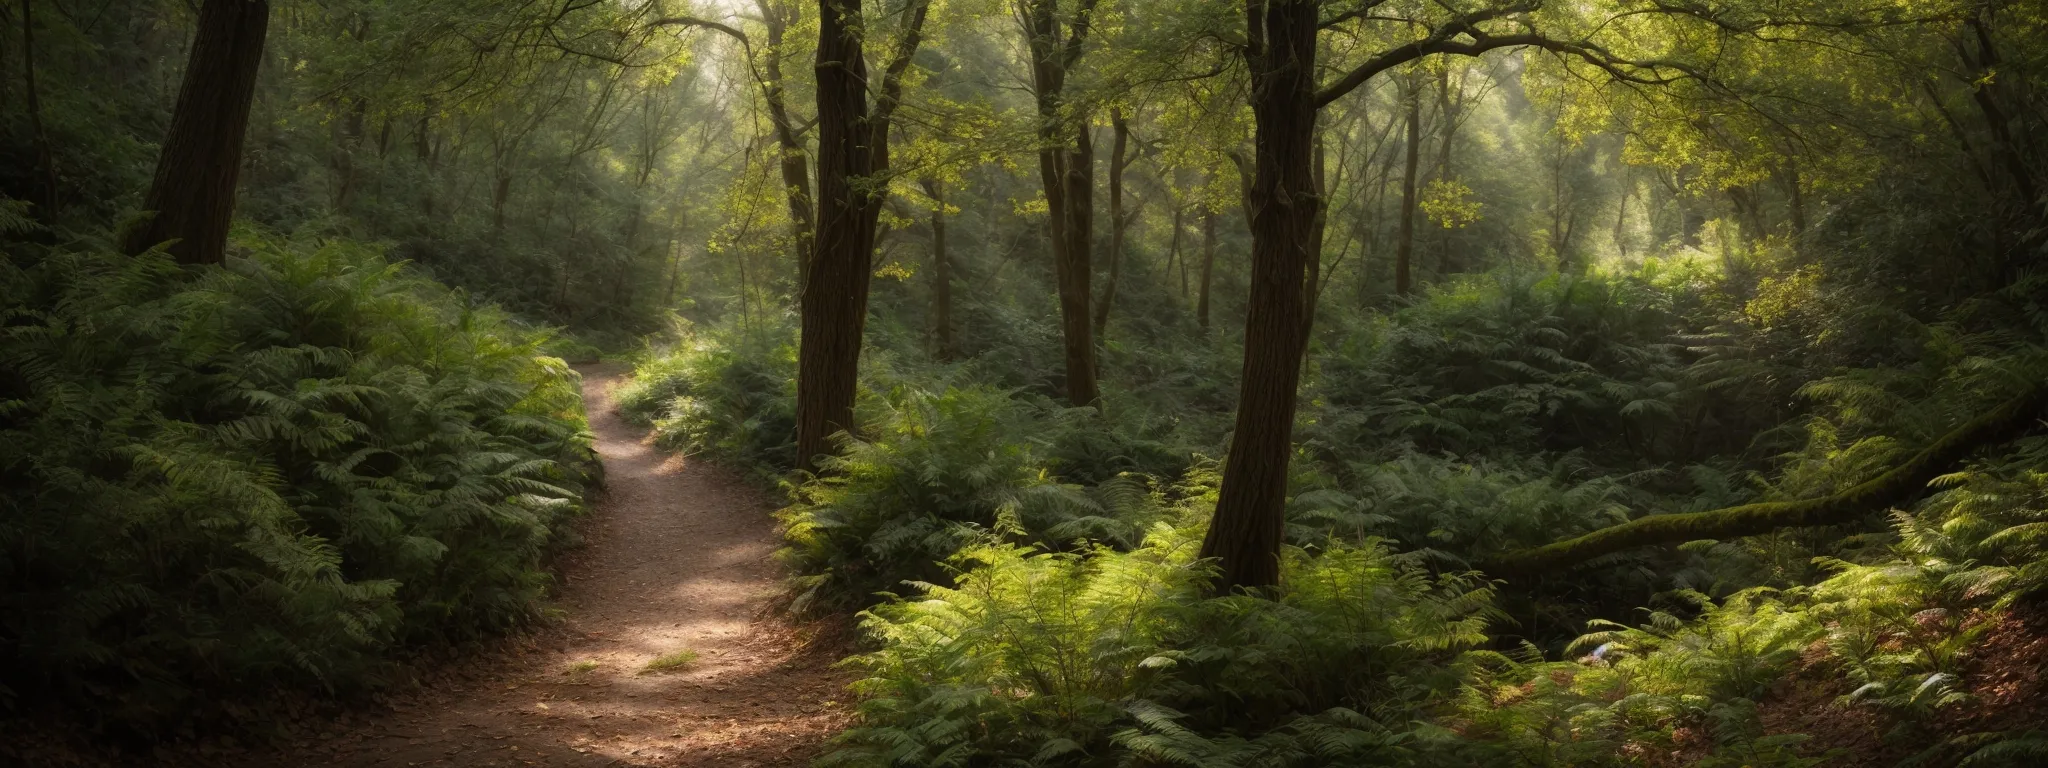 a luscious wooded area reveals a narrow, winding path leading to an unexpected clearing bathed in sunlight.